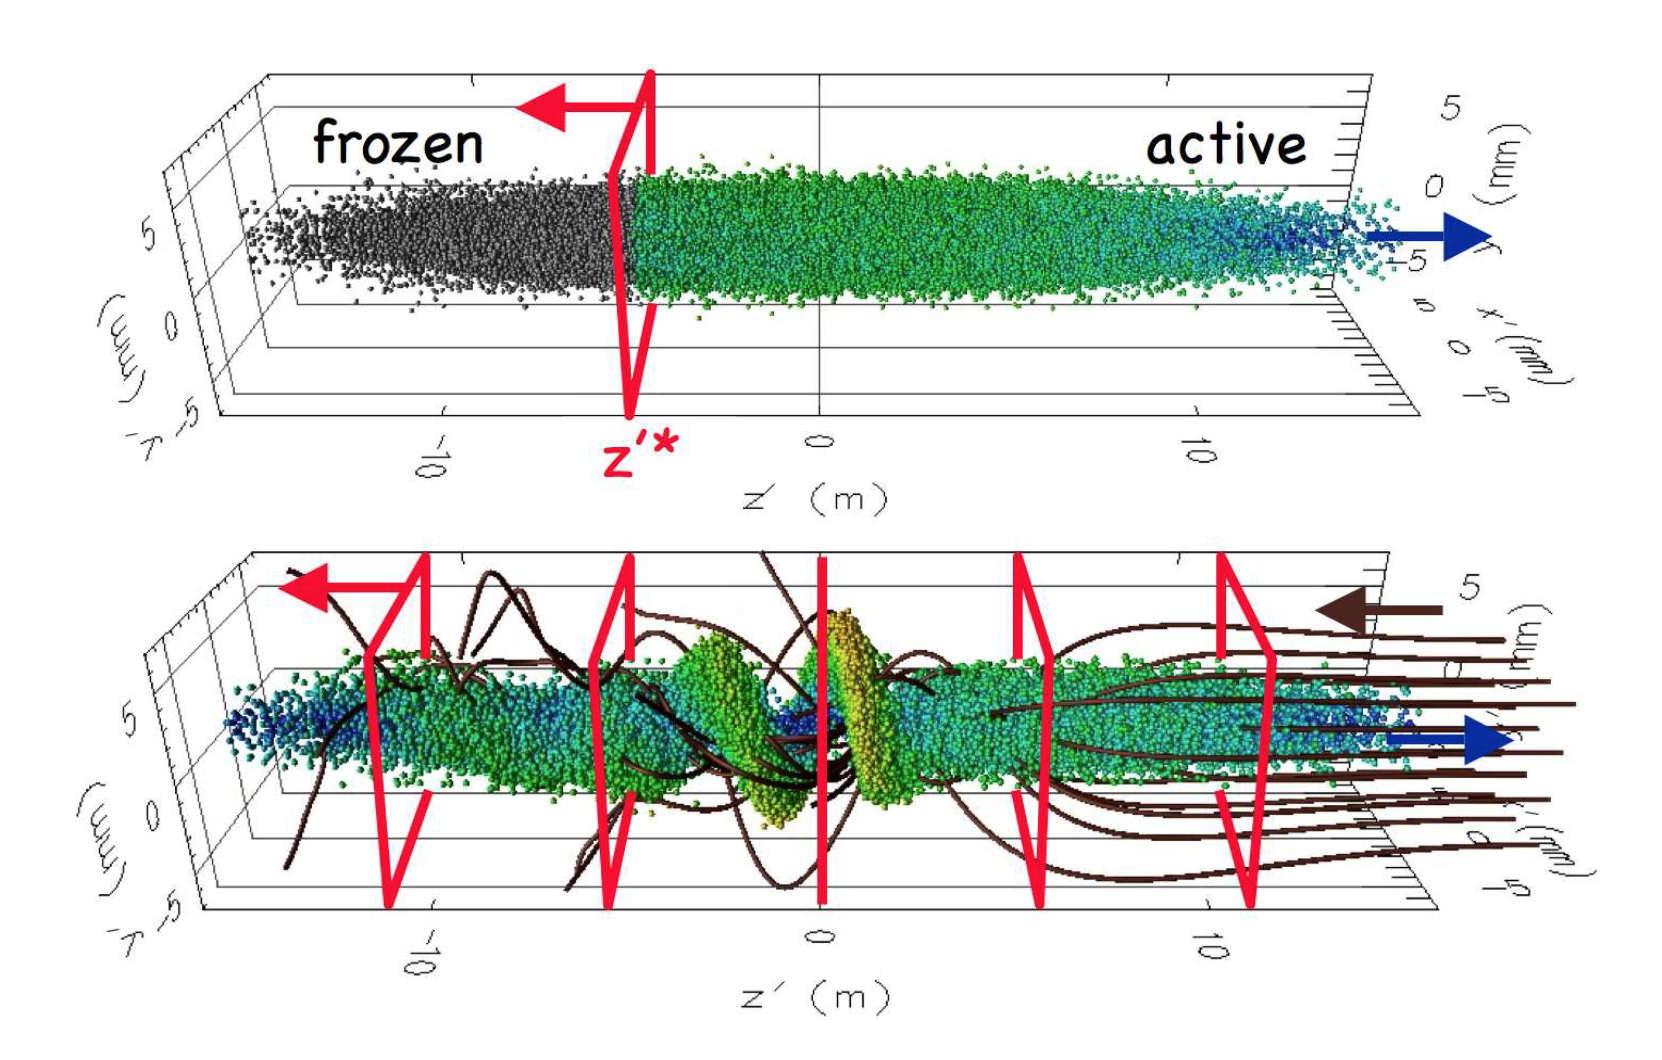 (top) Snapshot of a particle beam showing “frozen" (grey spheres) and “active" (colored spheres) macroparticles traversing the injection plane (red rectangle). (bottom) Snapshot of the beam macroparticles (colored spheres) passing through the background of electrons (dark brown streamlines) and the diagnostic stations (red rectangles). The electrons, the injection plane and the diagnostic stations are fixed in the laboratory plane, and are thus counter-propagating to the beam in a boosted frame.